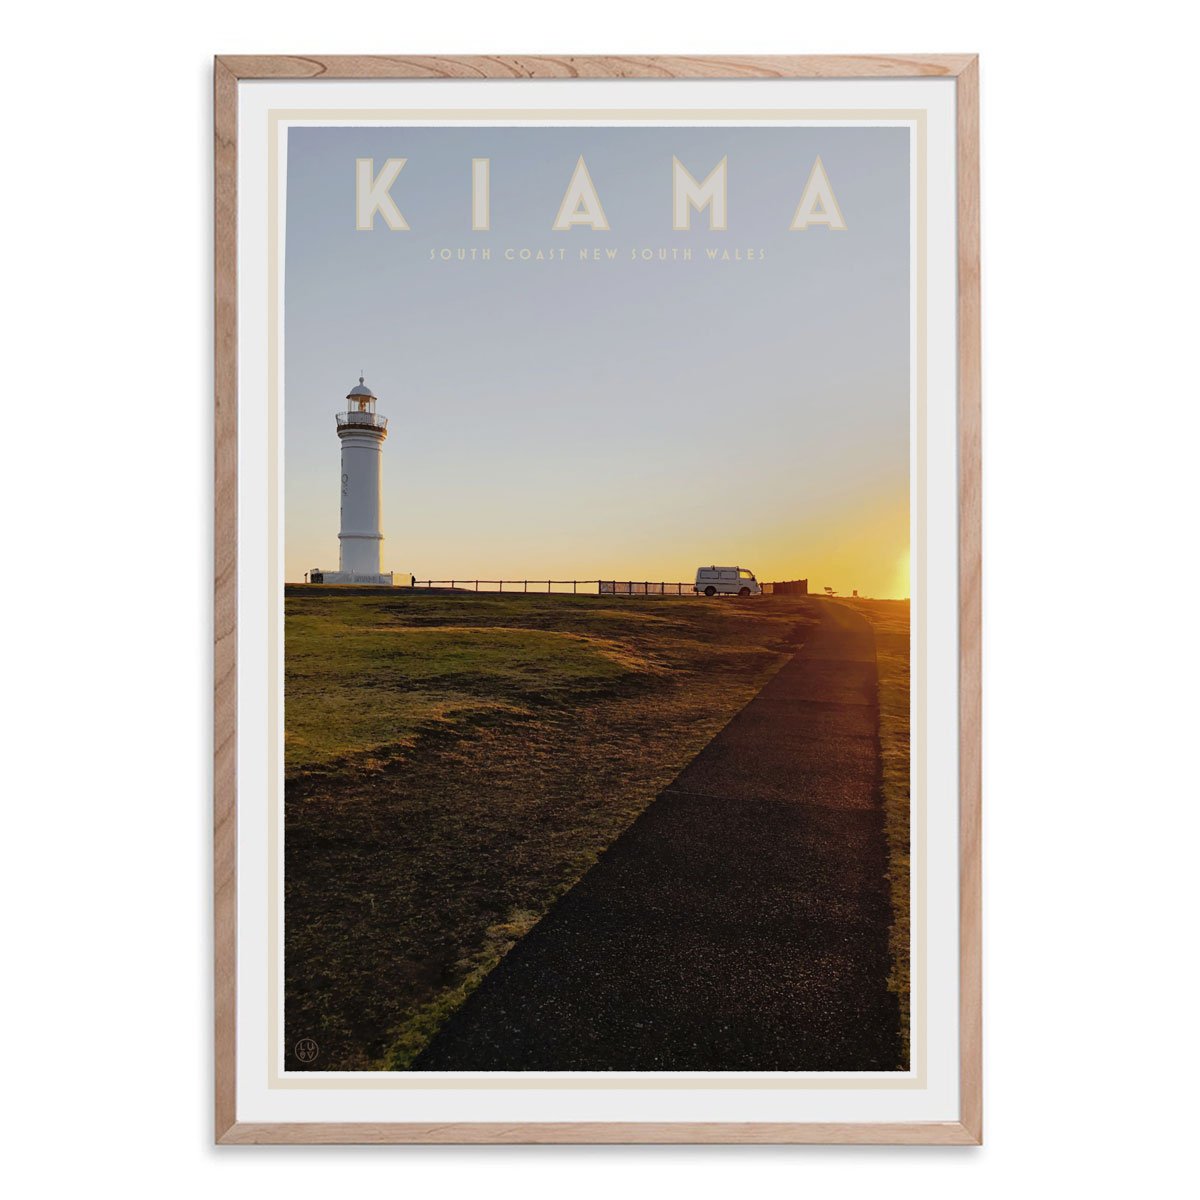 Kiama vintage travel style print in oak frame - design by Places We Luv